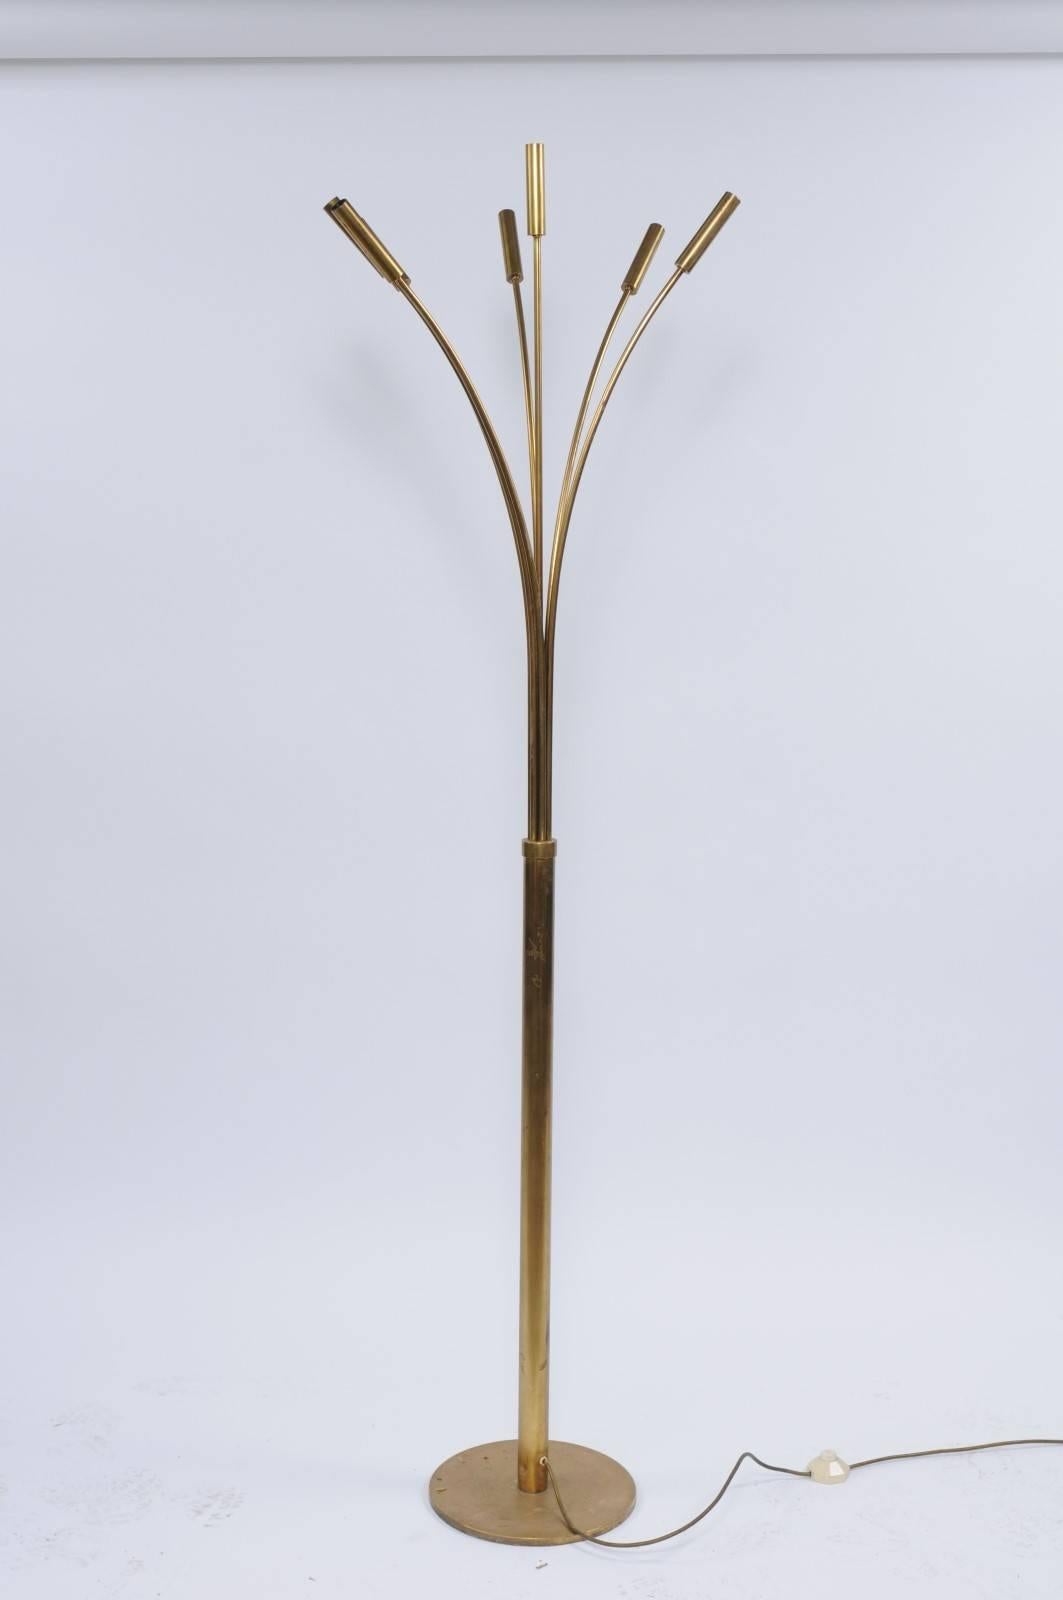 An Italian vintage brass seven-light floor lamp from the 1970s. We jump when we find tall, thin and graceful brass lamps like this one. The perfect marriage of art and function, its seven beautifully arched arms come out of a solid brass base like